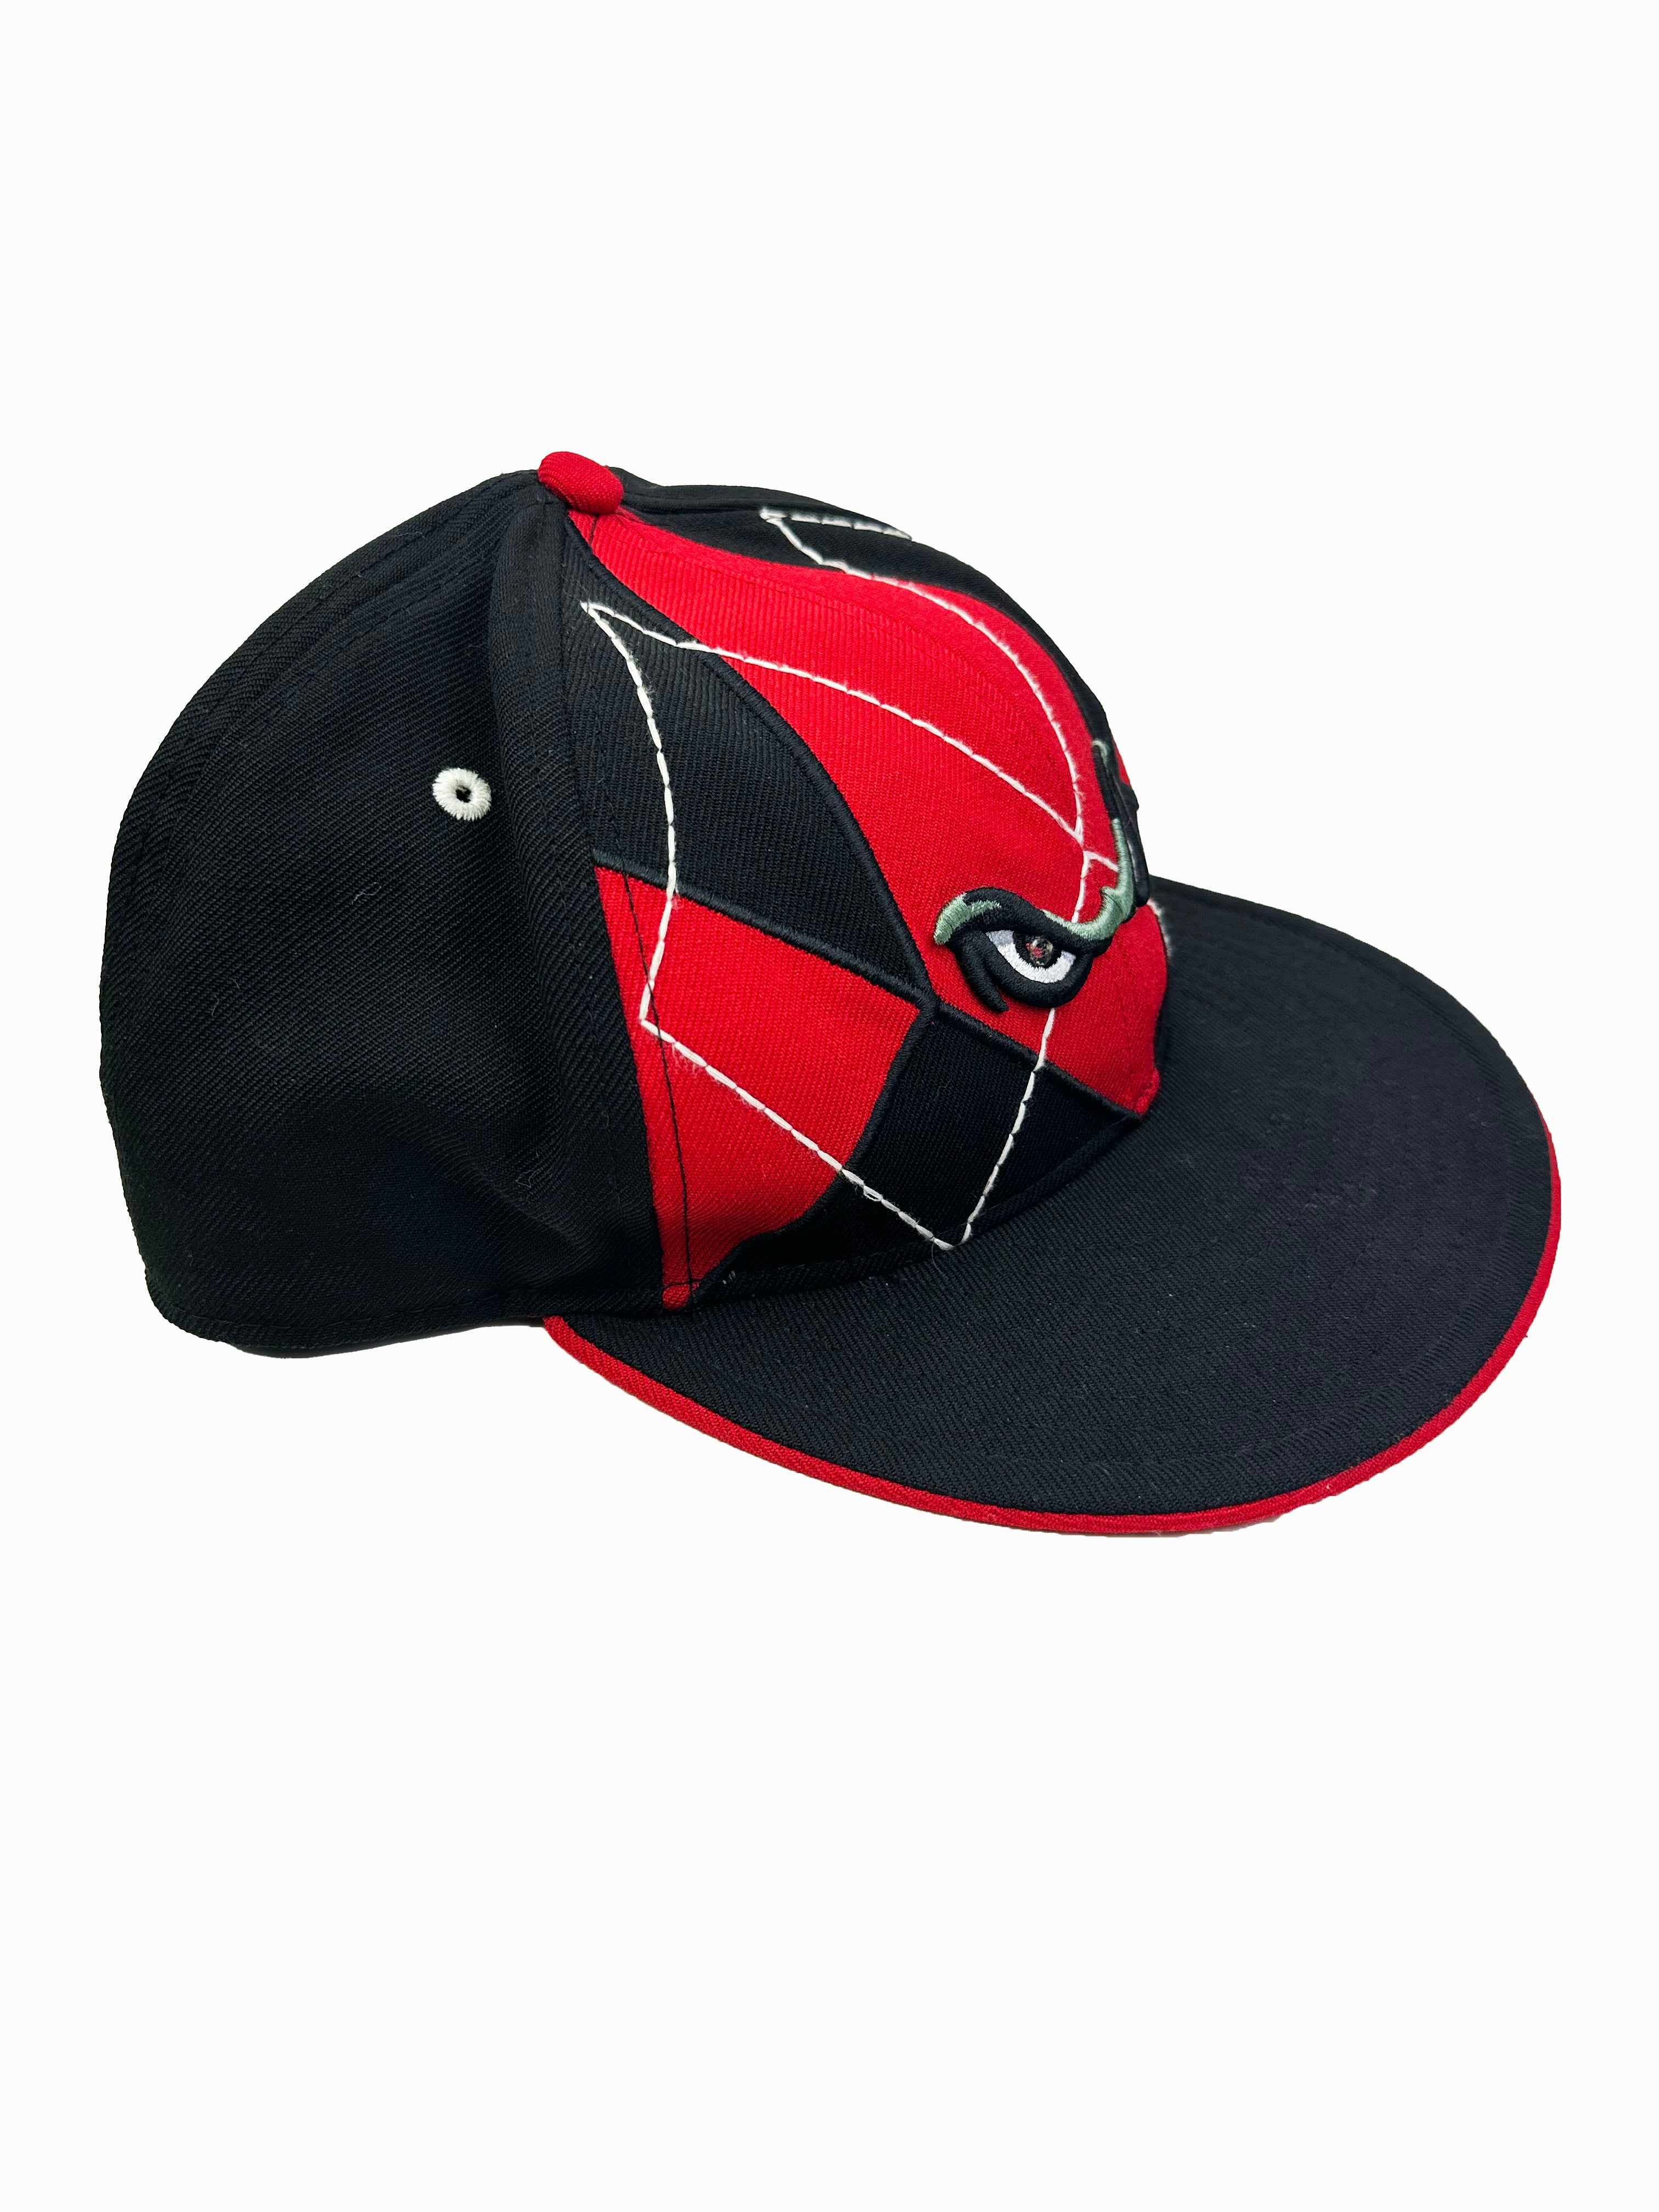 Lake Elsinore Red Argyle Hat 00's